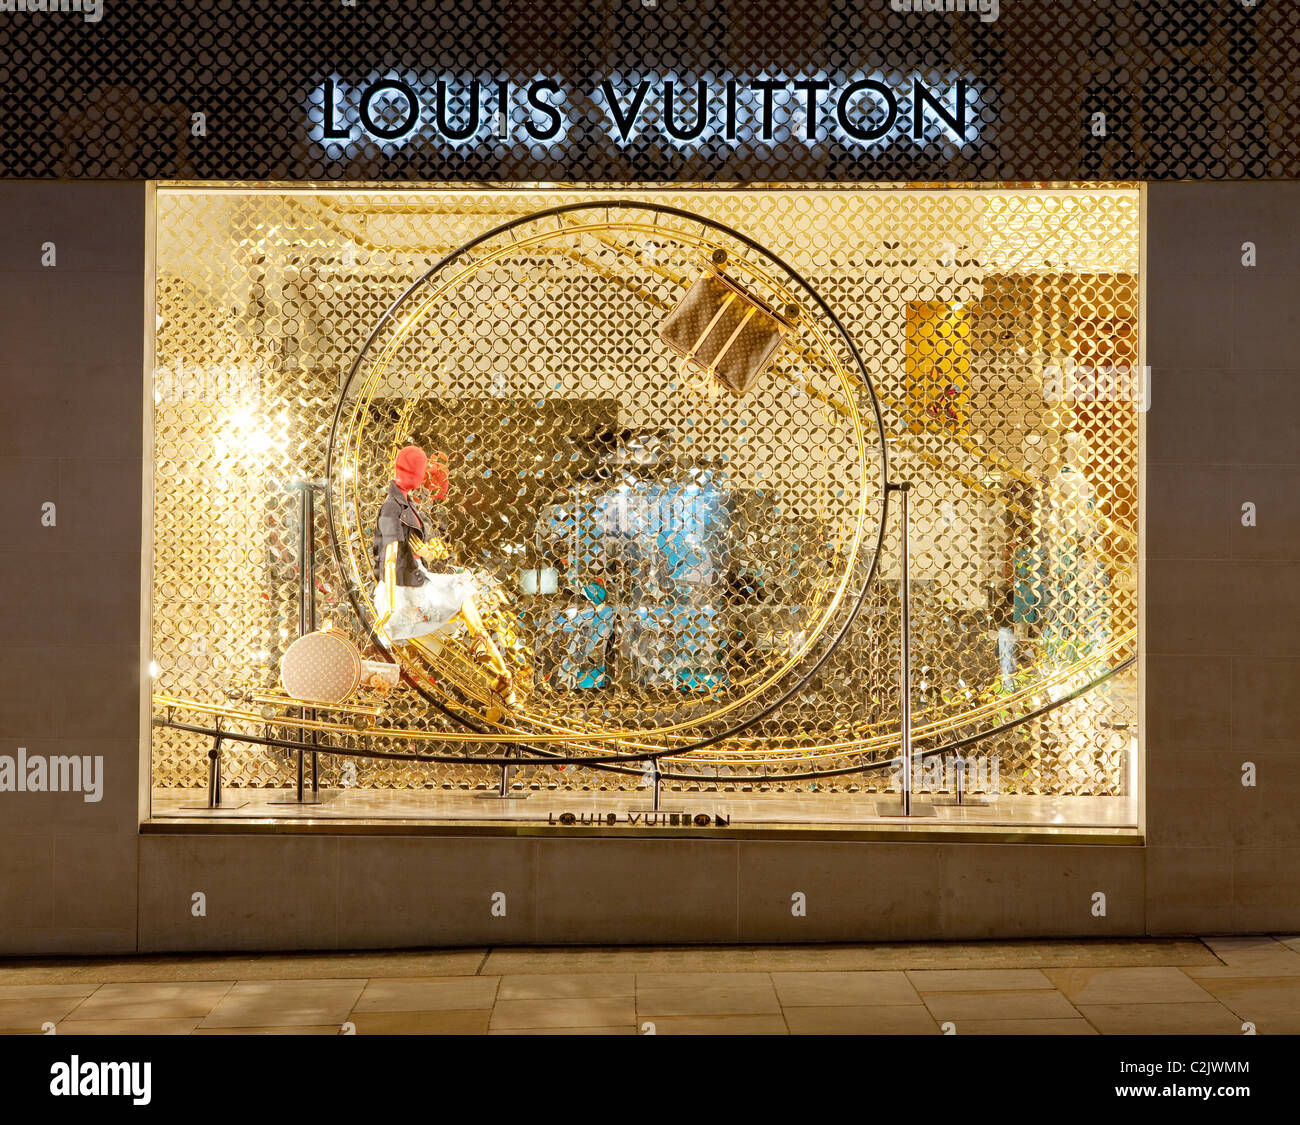 Louis Vuitton flagship store in London in the evening Stock Photo